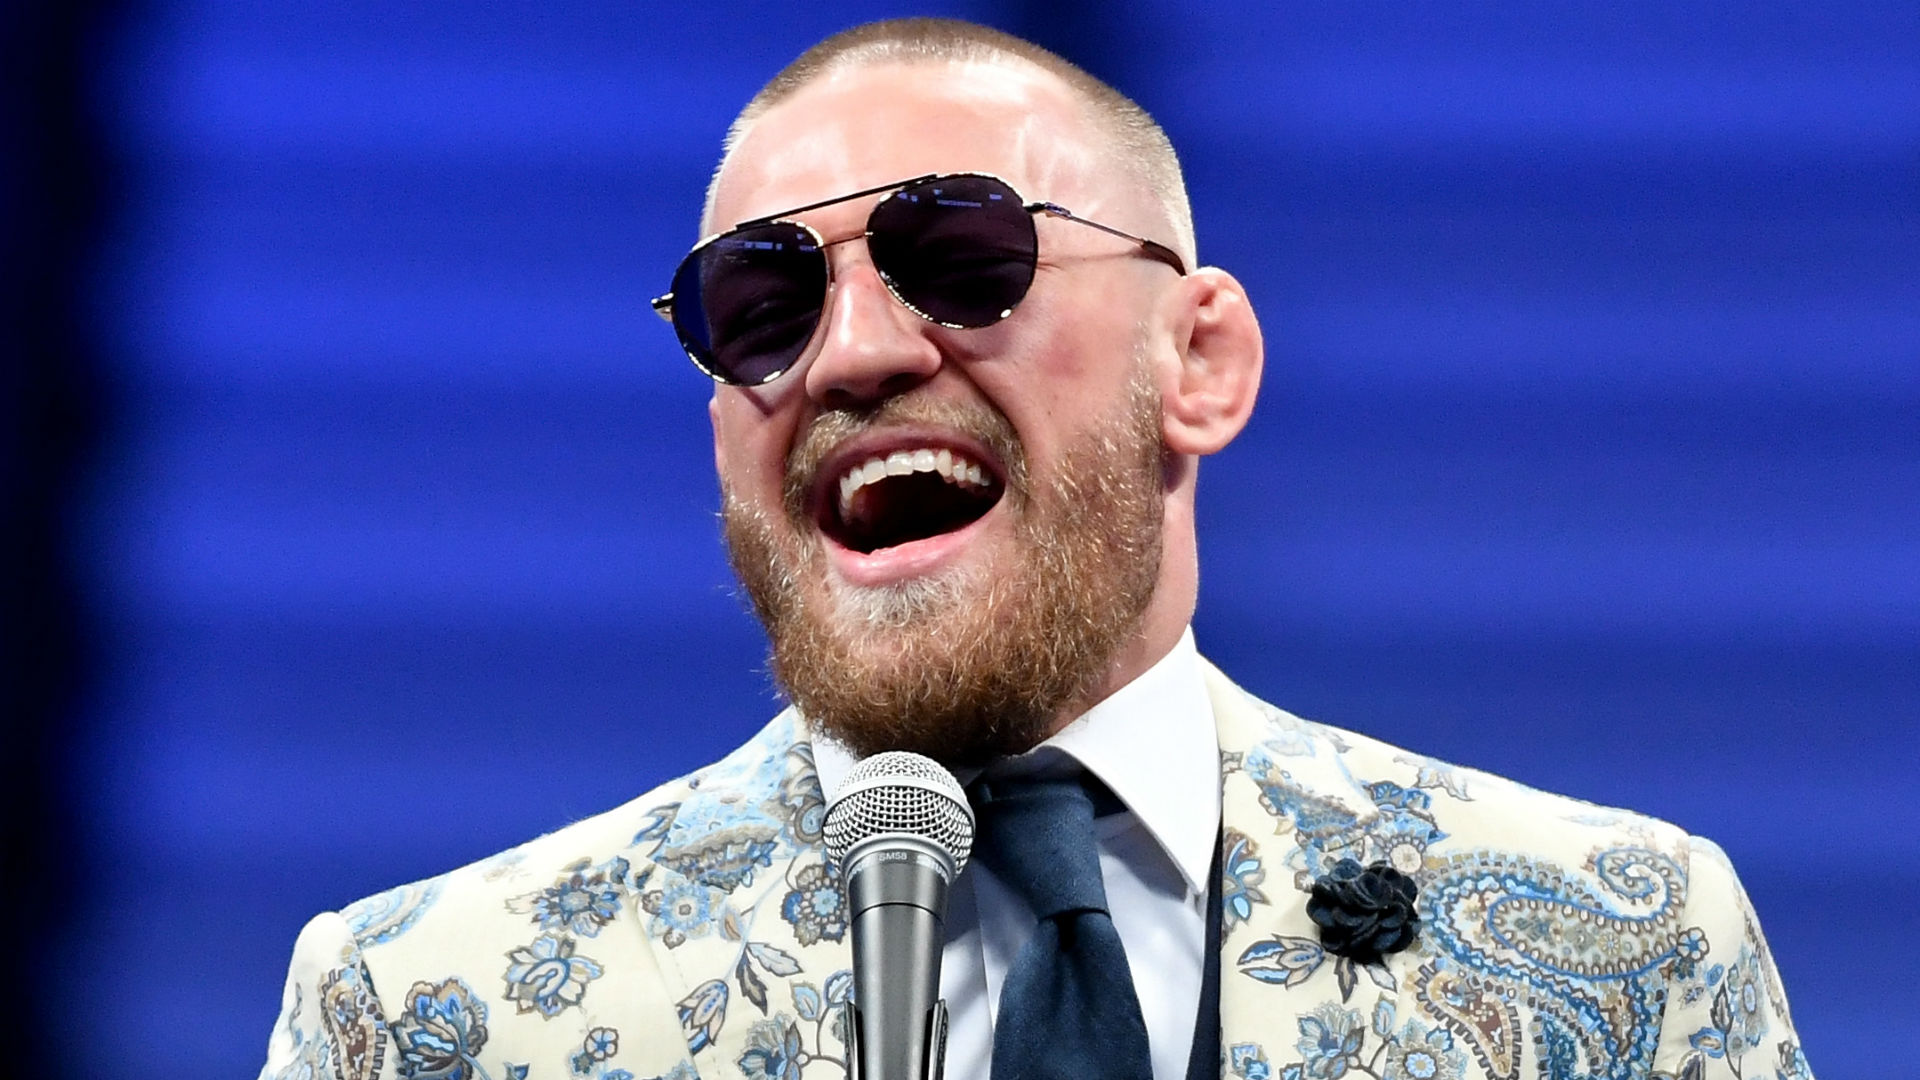 Although Conor McGregor was arrested for allegedly damaging a fan's phone this week, he made a surprise appearance before an NHL match.